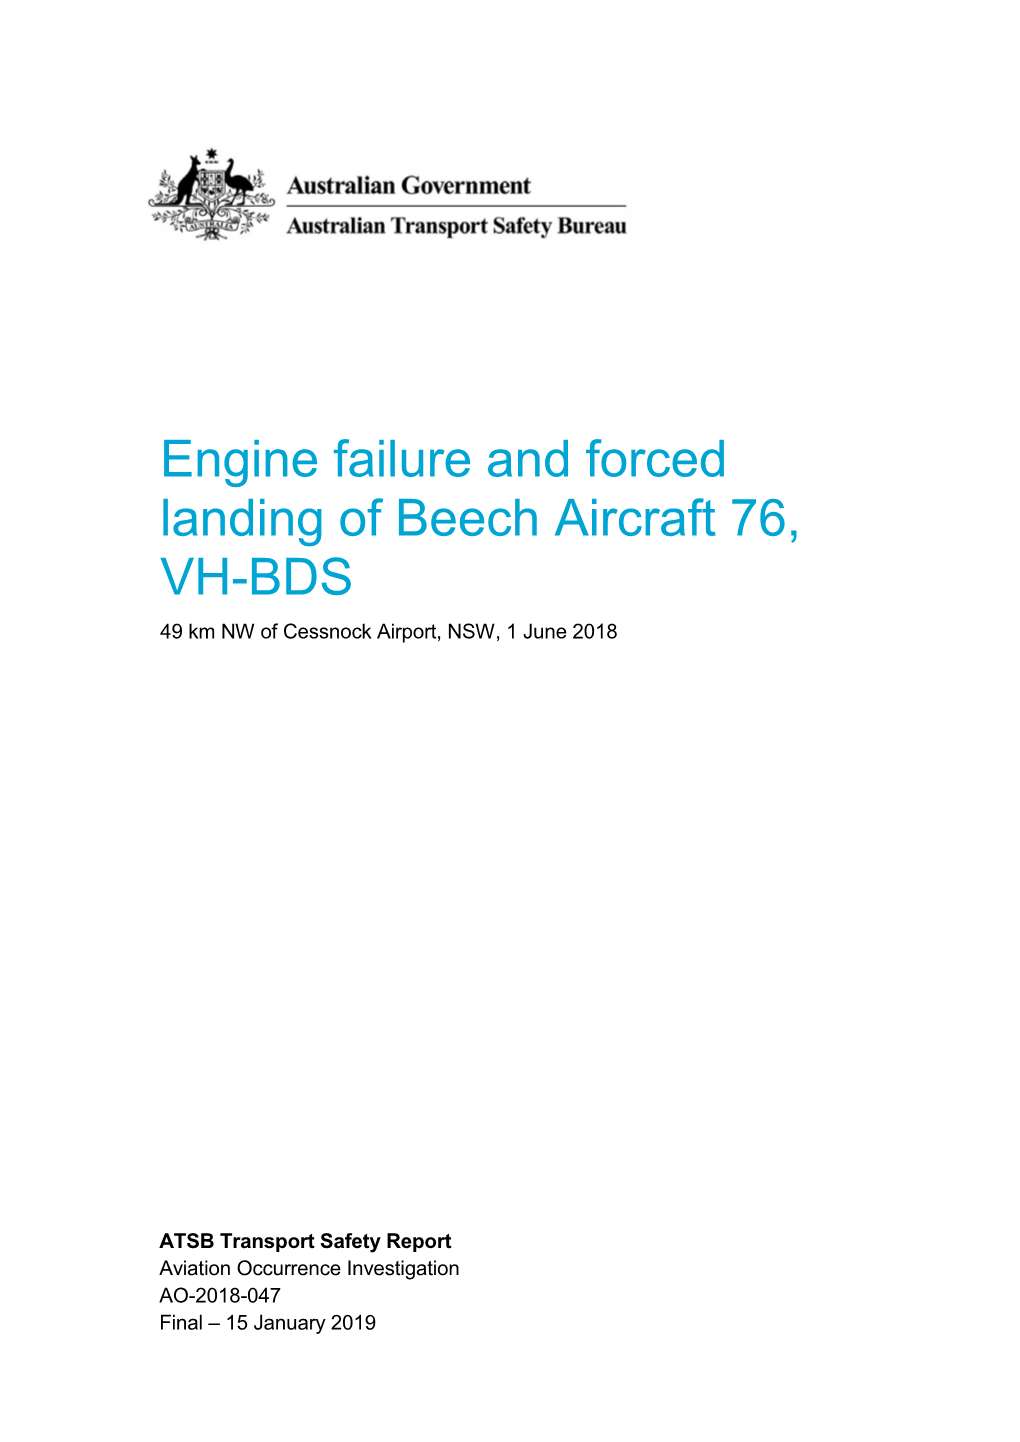 Engine Failure and Forced Landing of Beech Aircraft 76, VH-BDS